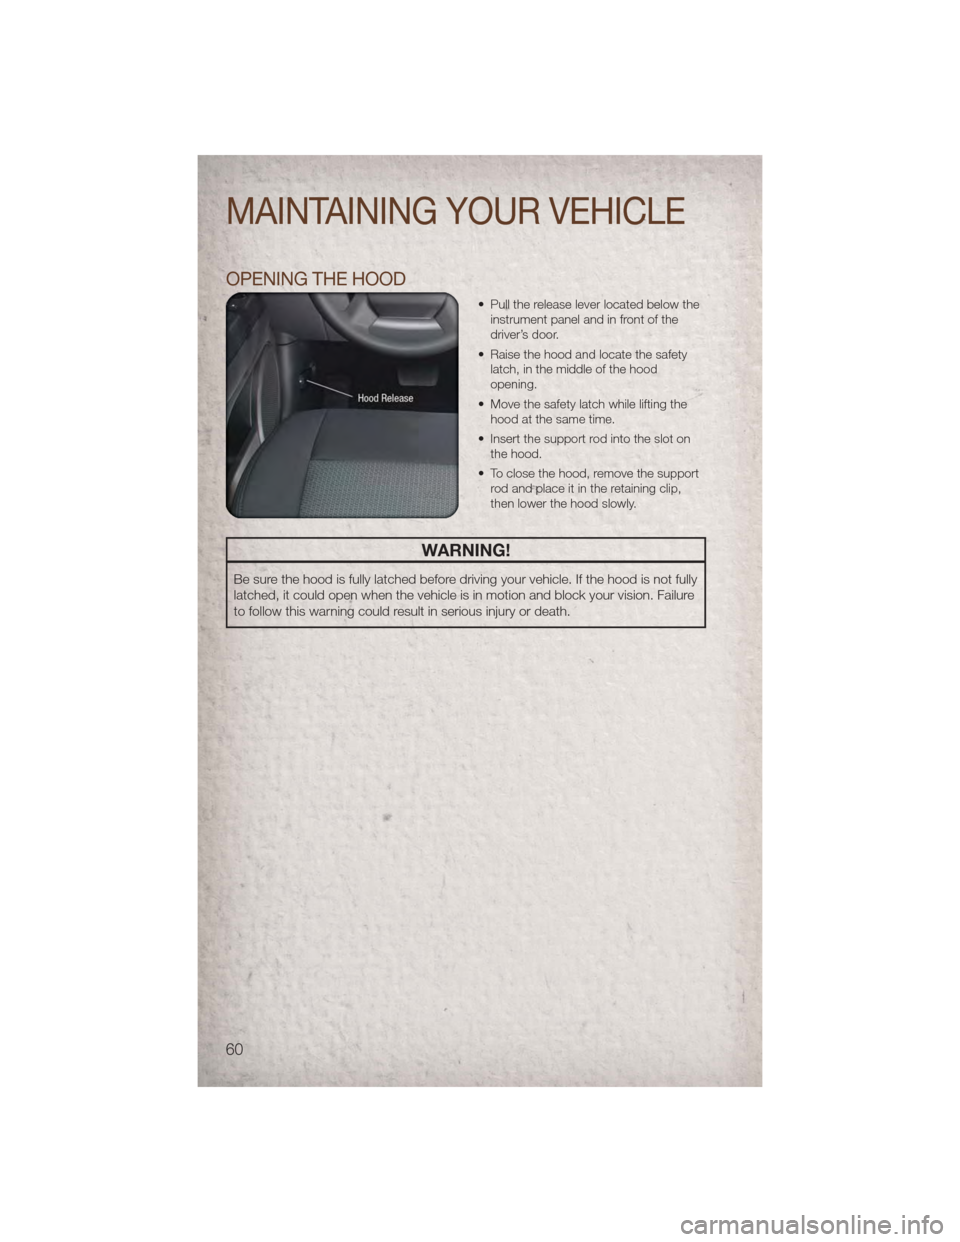 JEEP PATRIOT 2011 1.G User Guide OPENING THE HOOD
• Pull the release lever located below theinstrument panel and in front of the
driver’s door.
• Raise the hood and locate the safety latch, in the middle of the hood
opening.
�